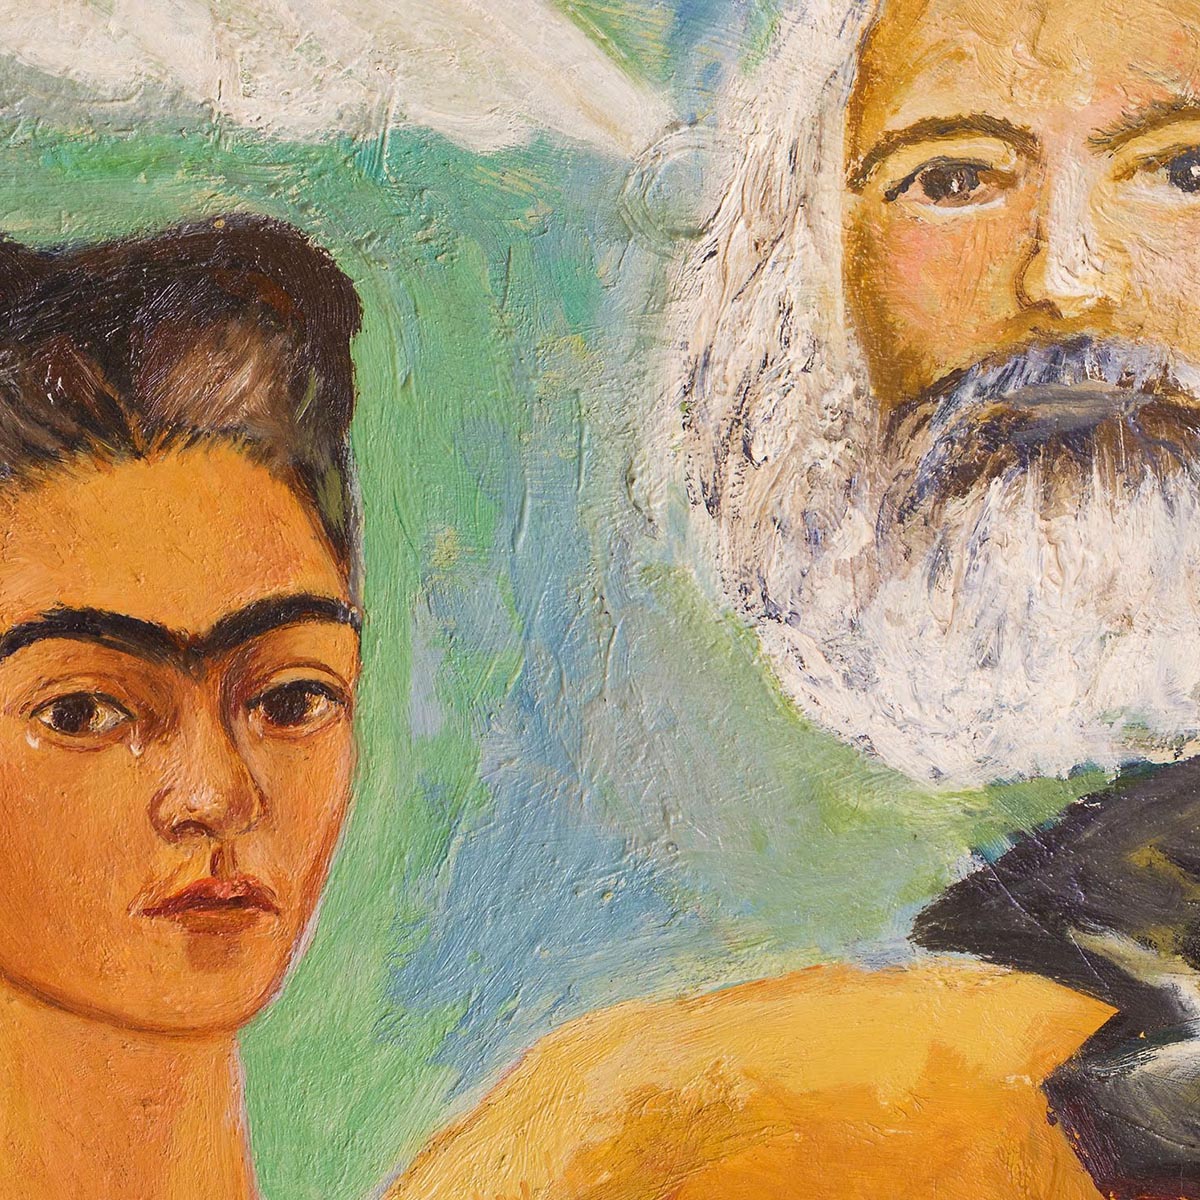 Marxism will give health to the Ill by Frida Kahlo